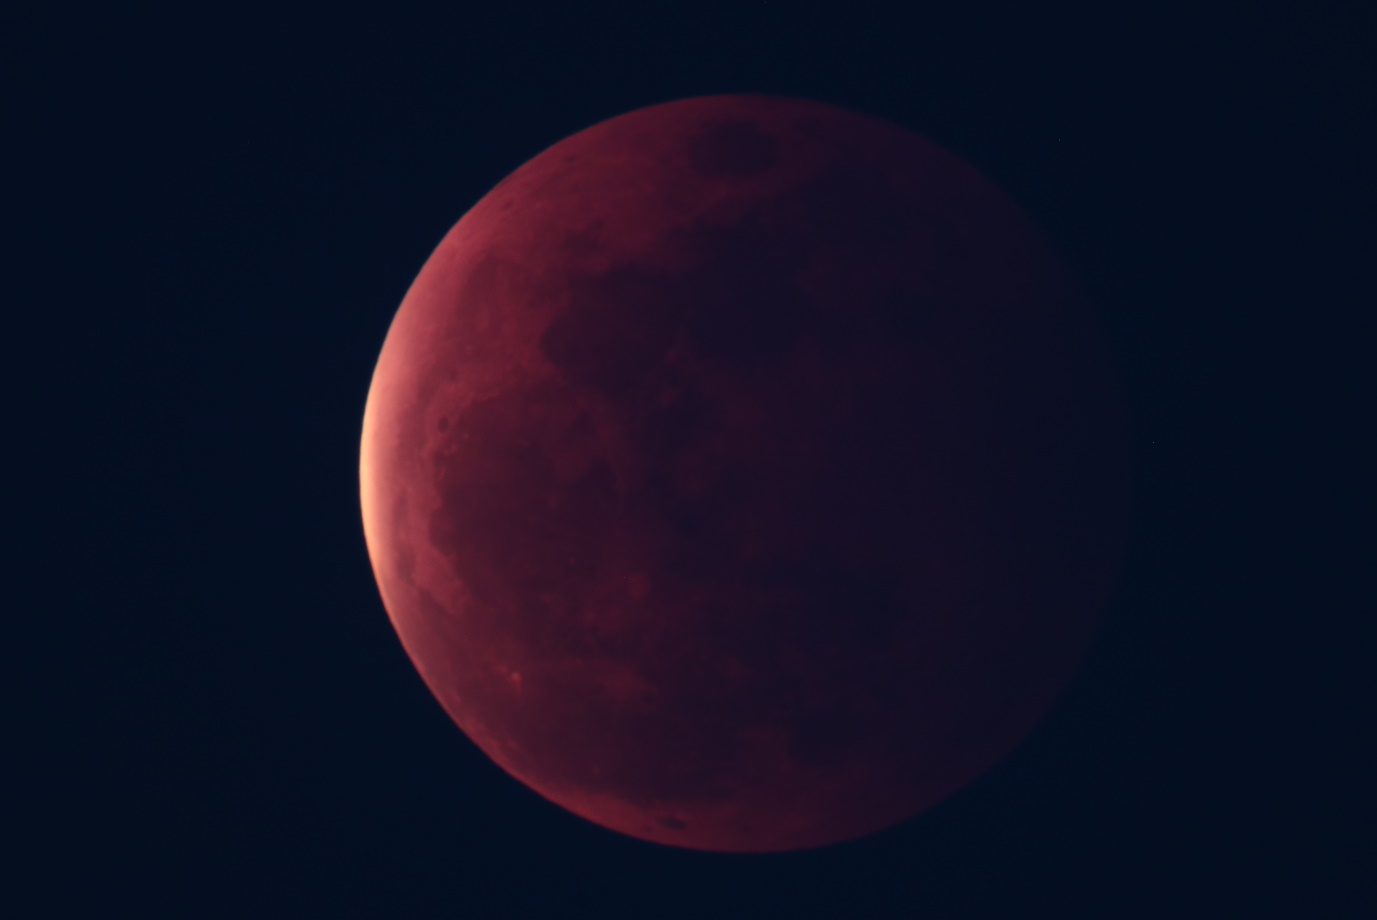 Review of the Total Lunar Eclipse on 26 May